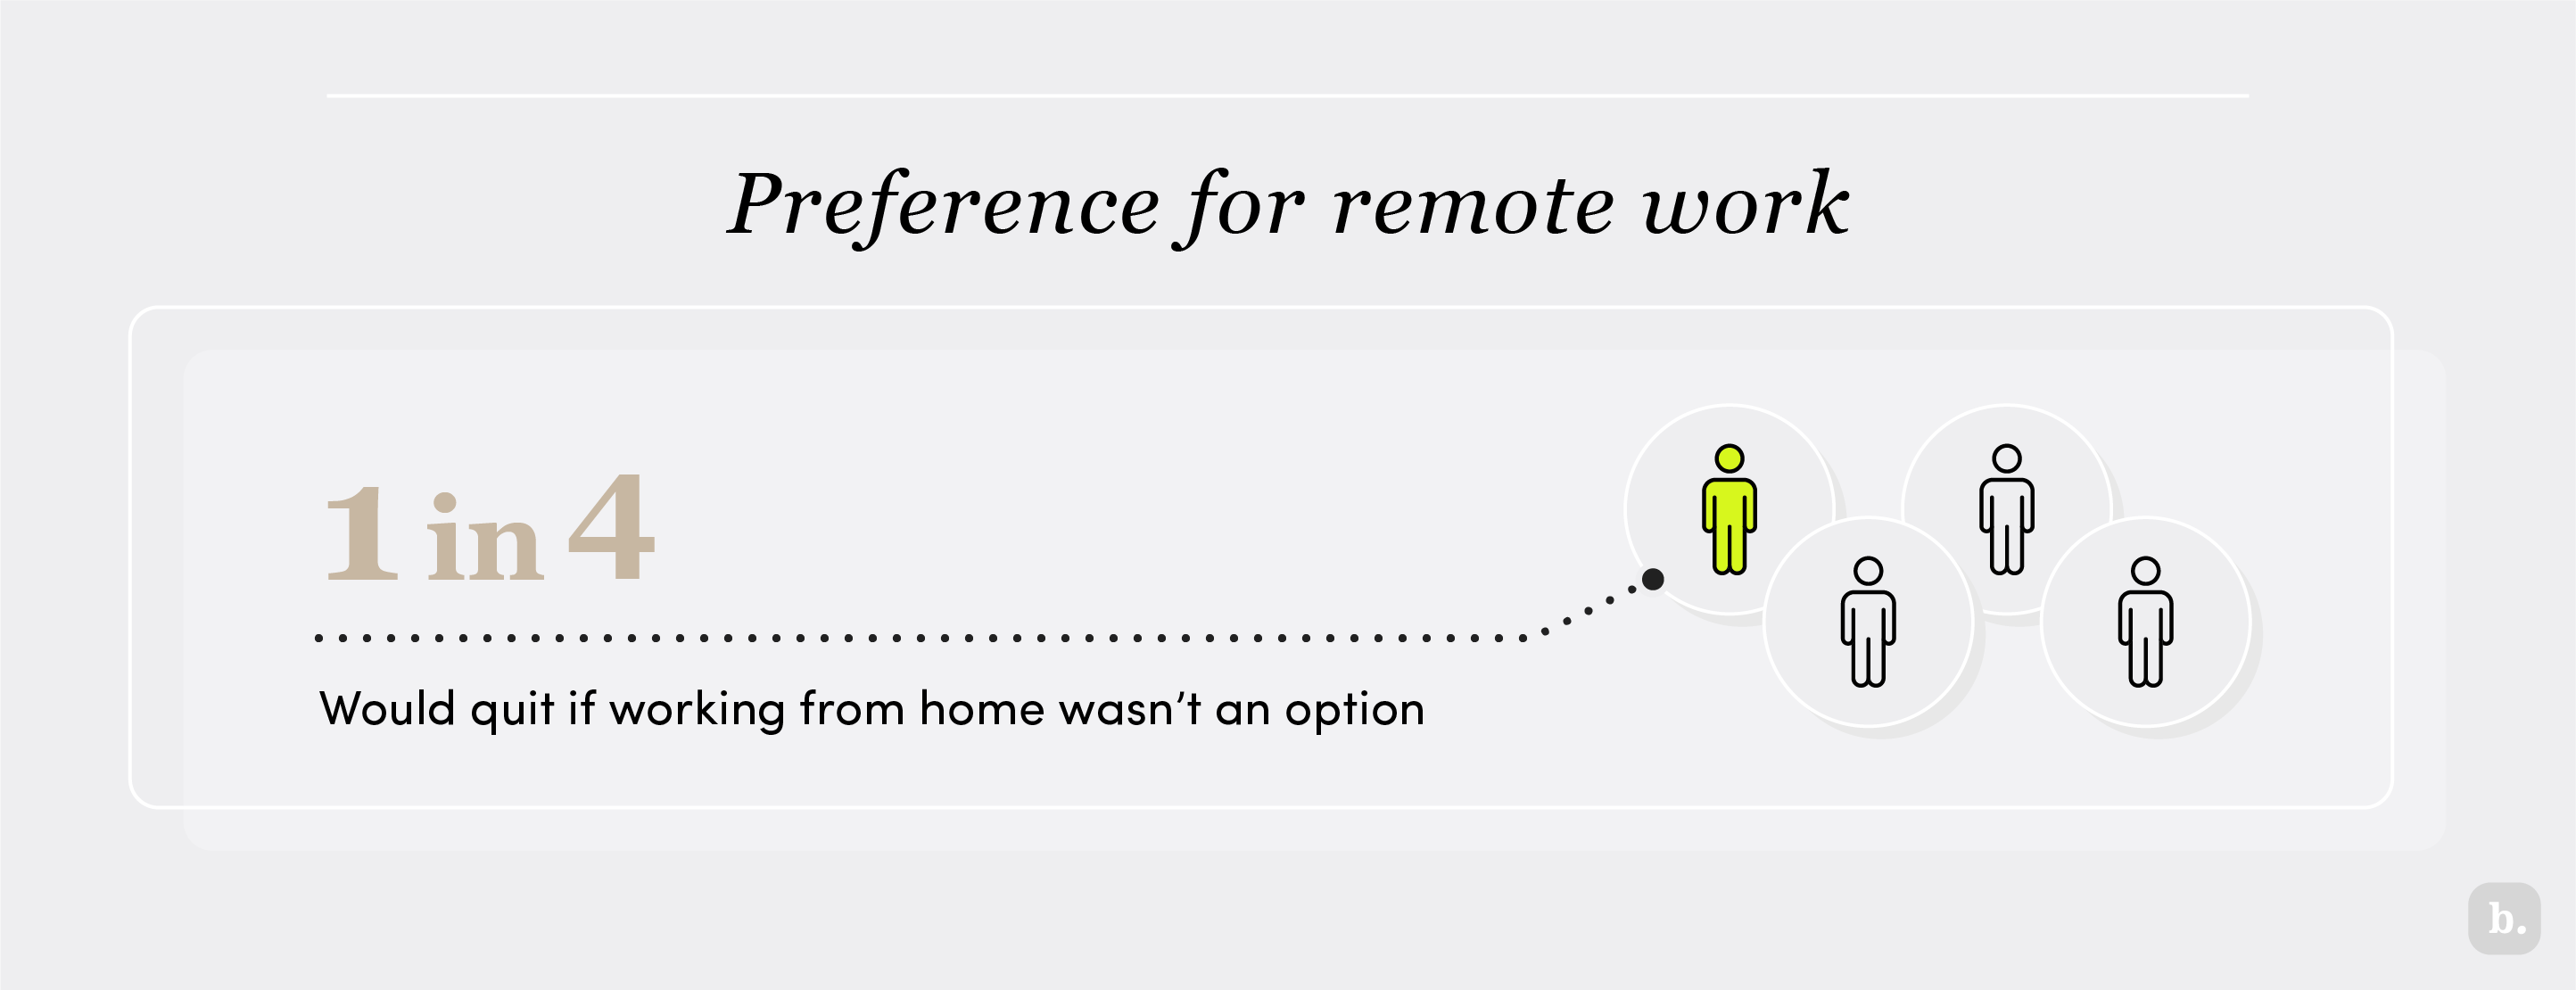 Preference for remote work graphic